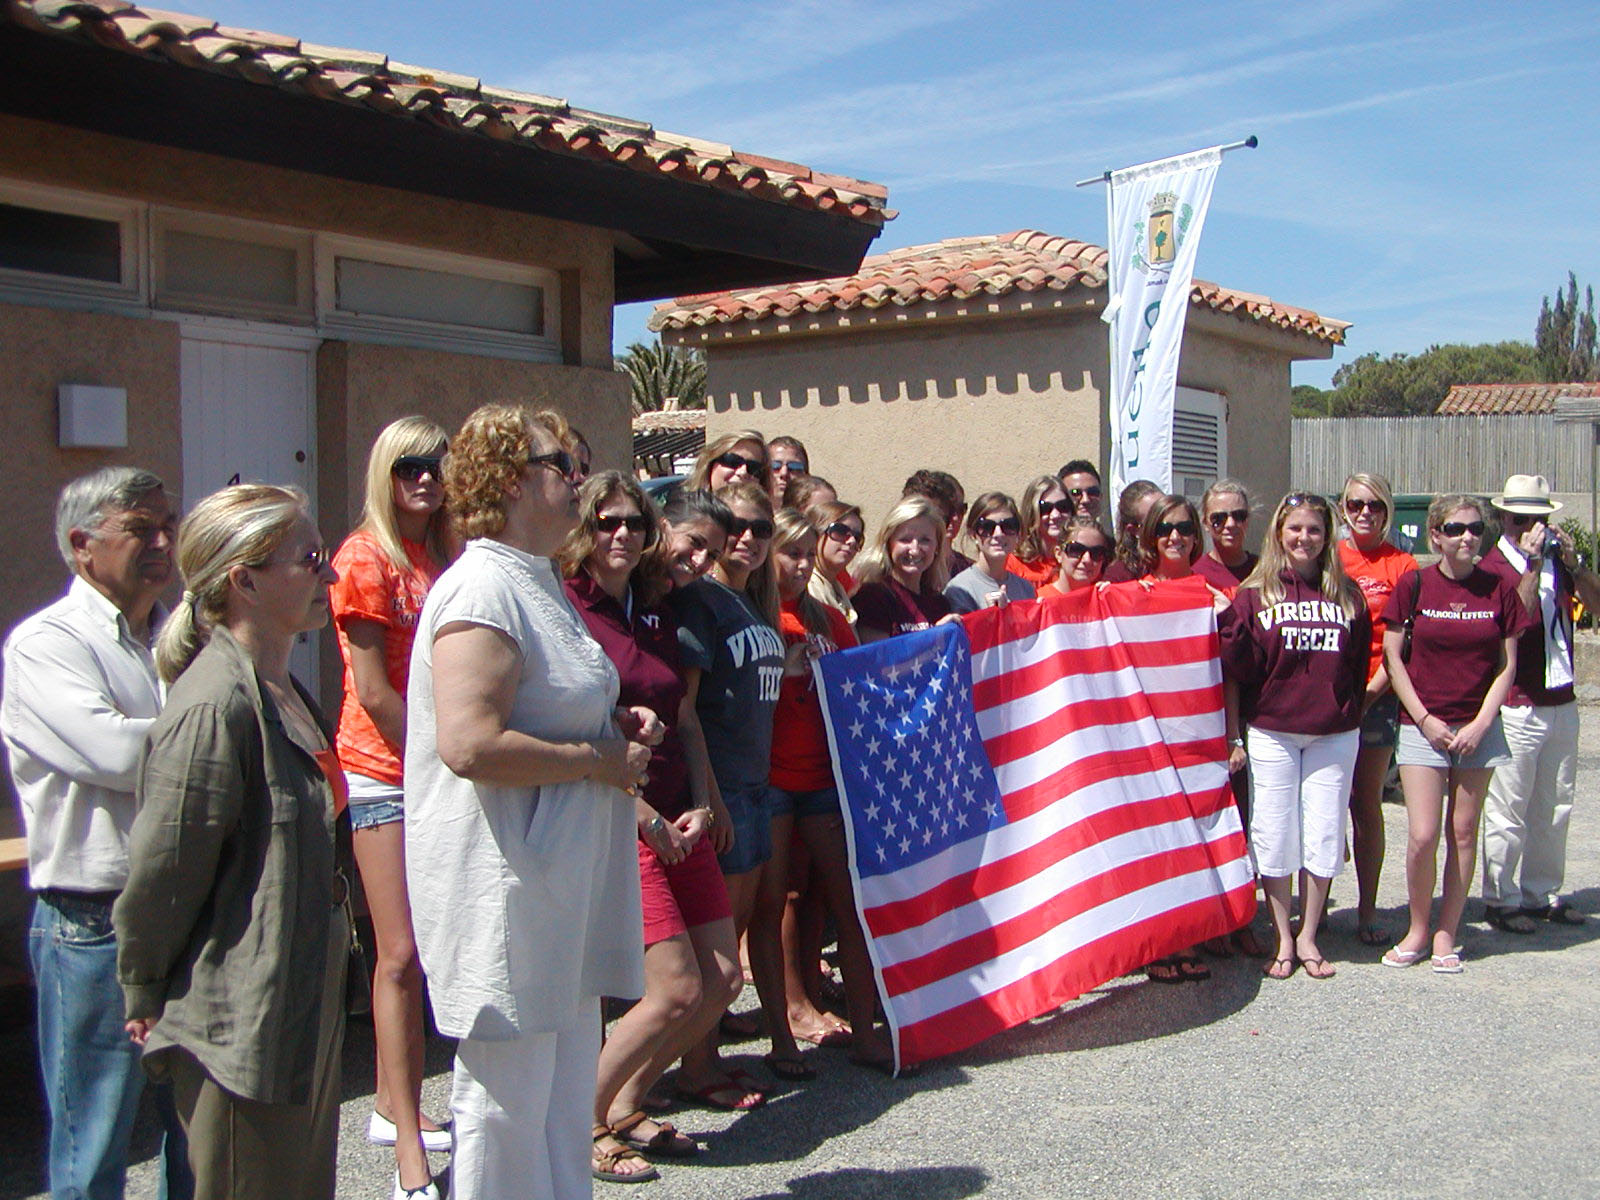 Pamplin students and faculty on a past study-abroad program in the French Riviera attended the official opening of Ramatuelle's Boulevard Patch.